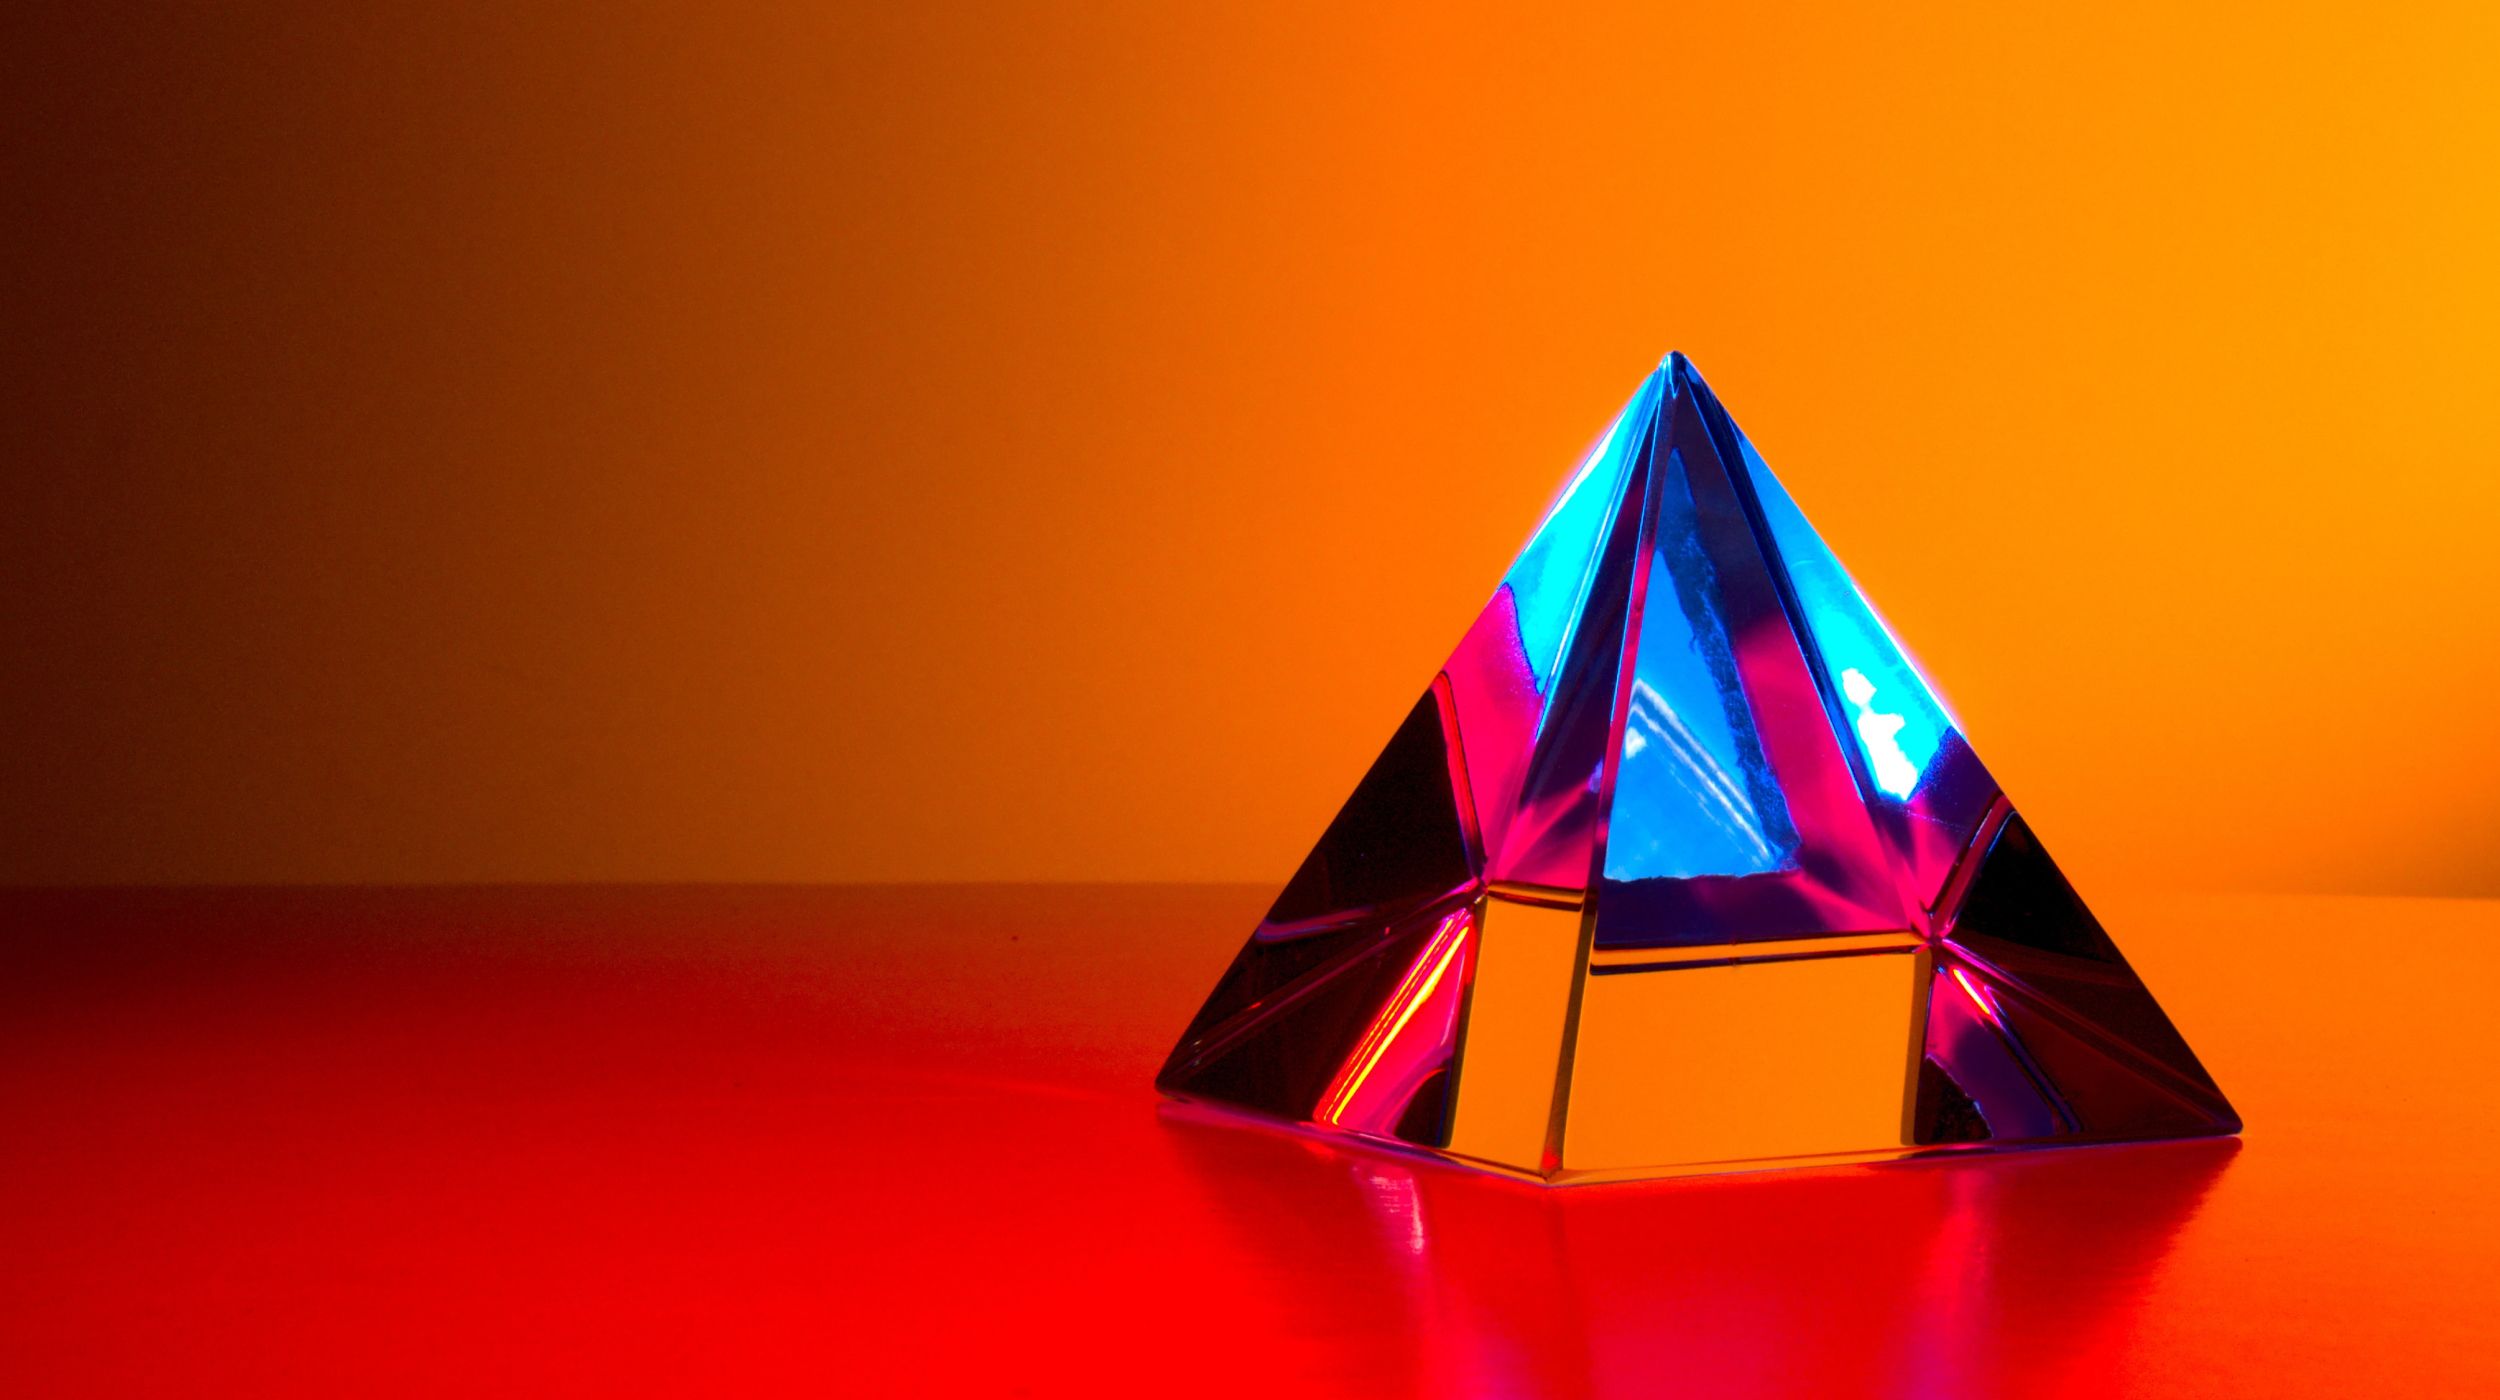 A glass pyramid on an orange table and background reflecting the blue sky